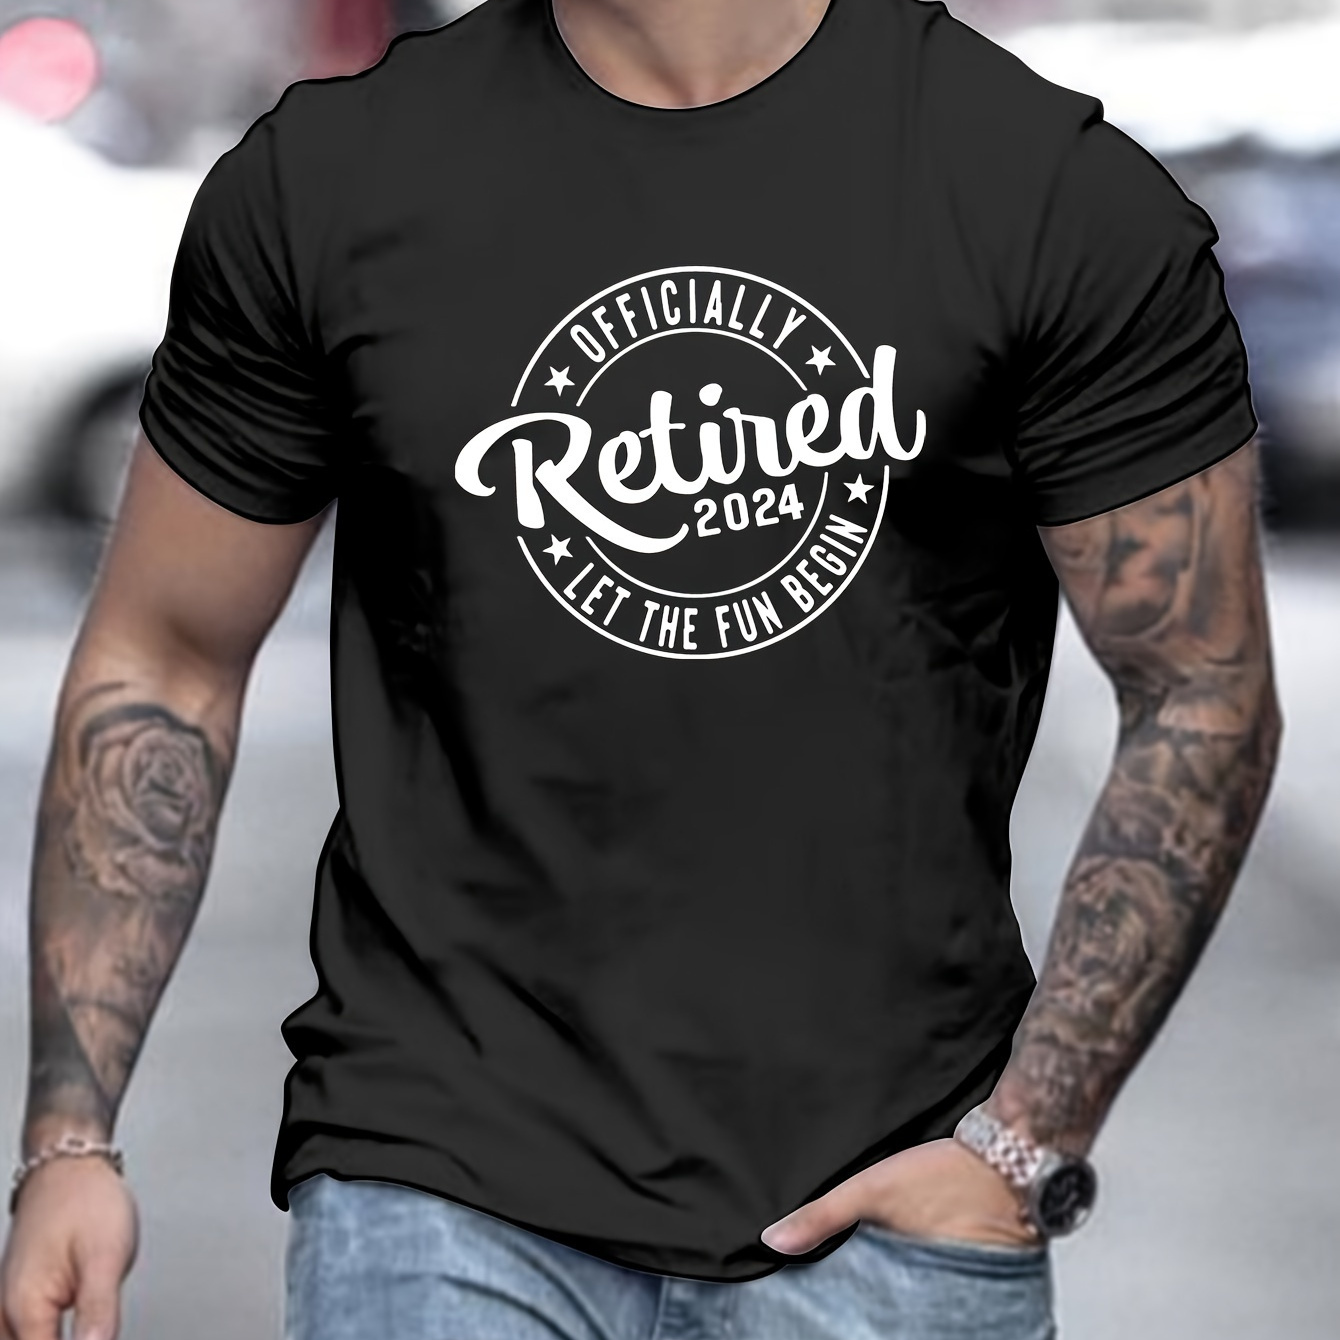 

Retired 2024 Pattern Print Men's Crew Neck Short Sleeve Tees, Summer Trendy T-shirt, Casual Comfortable Top For Outdoor Sports & Vacation Camping